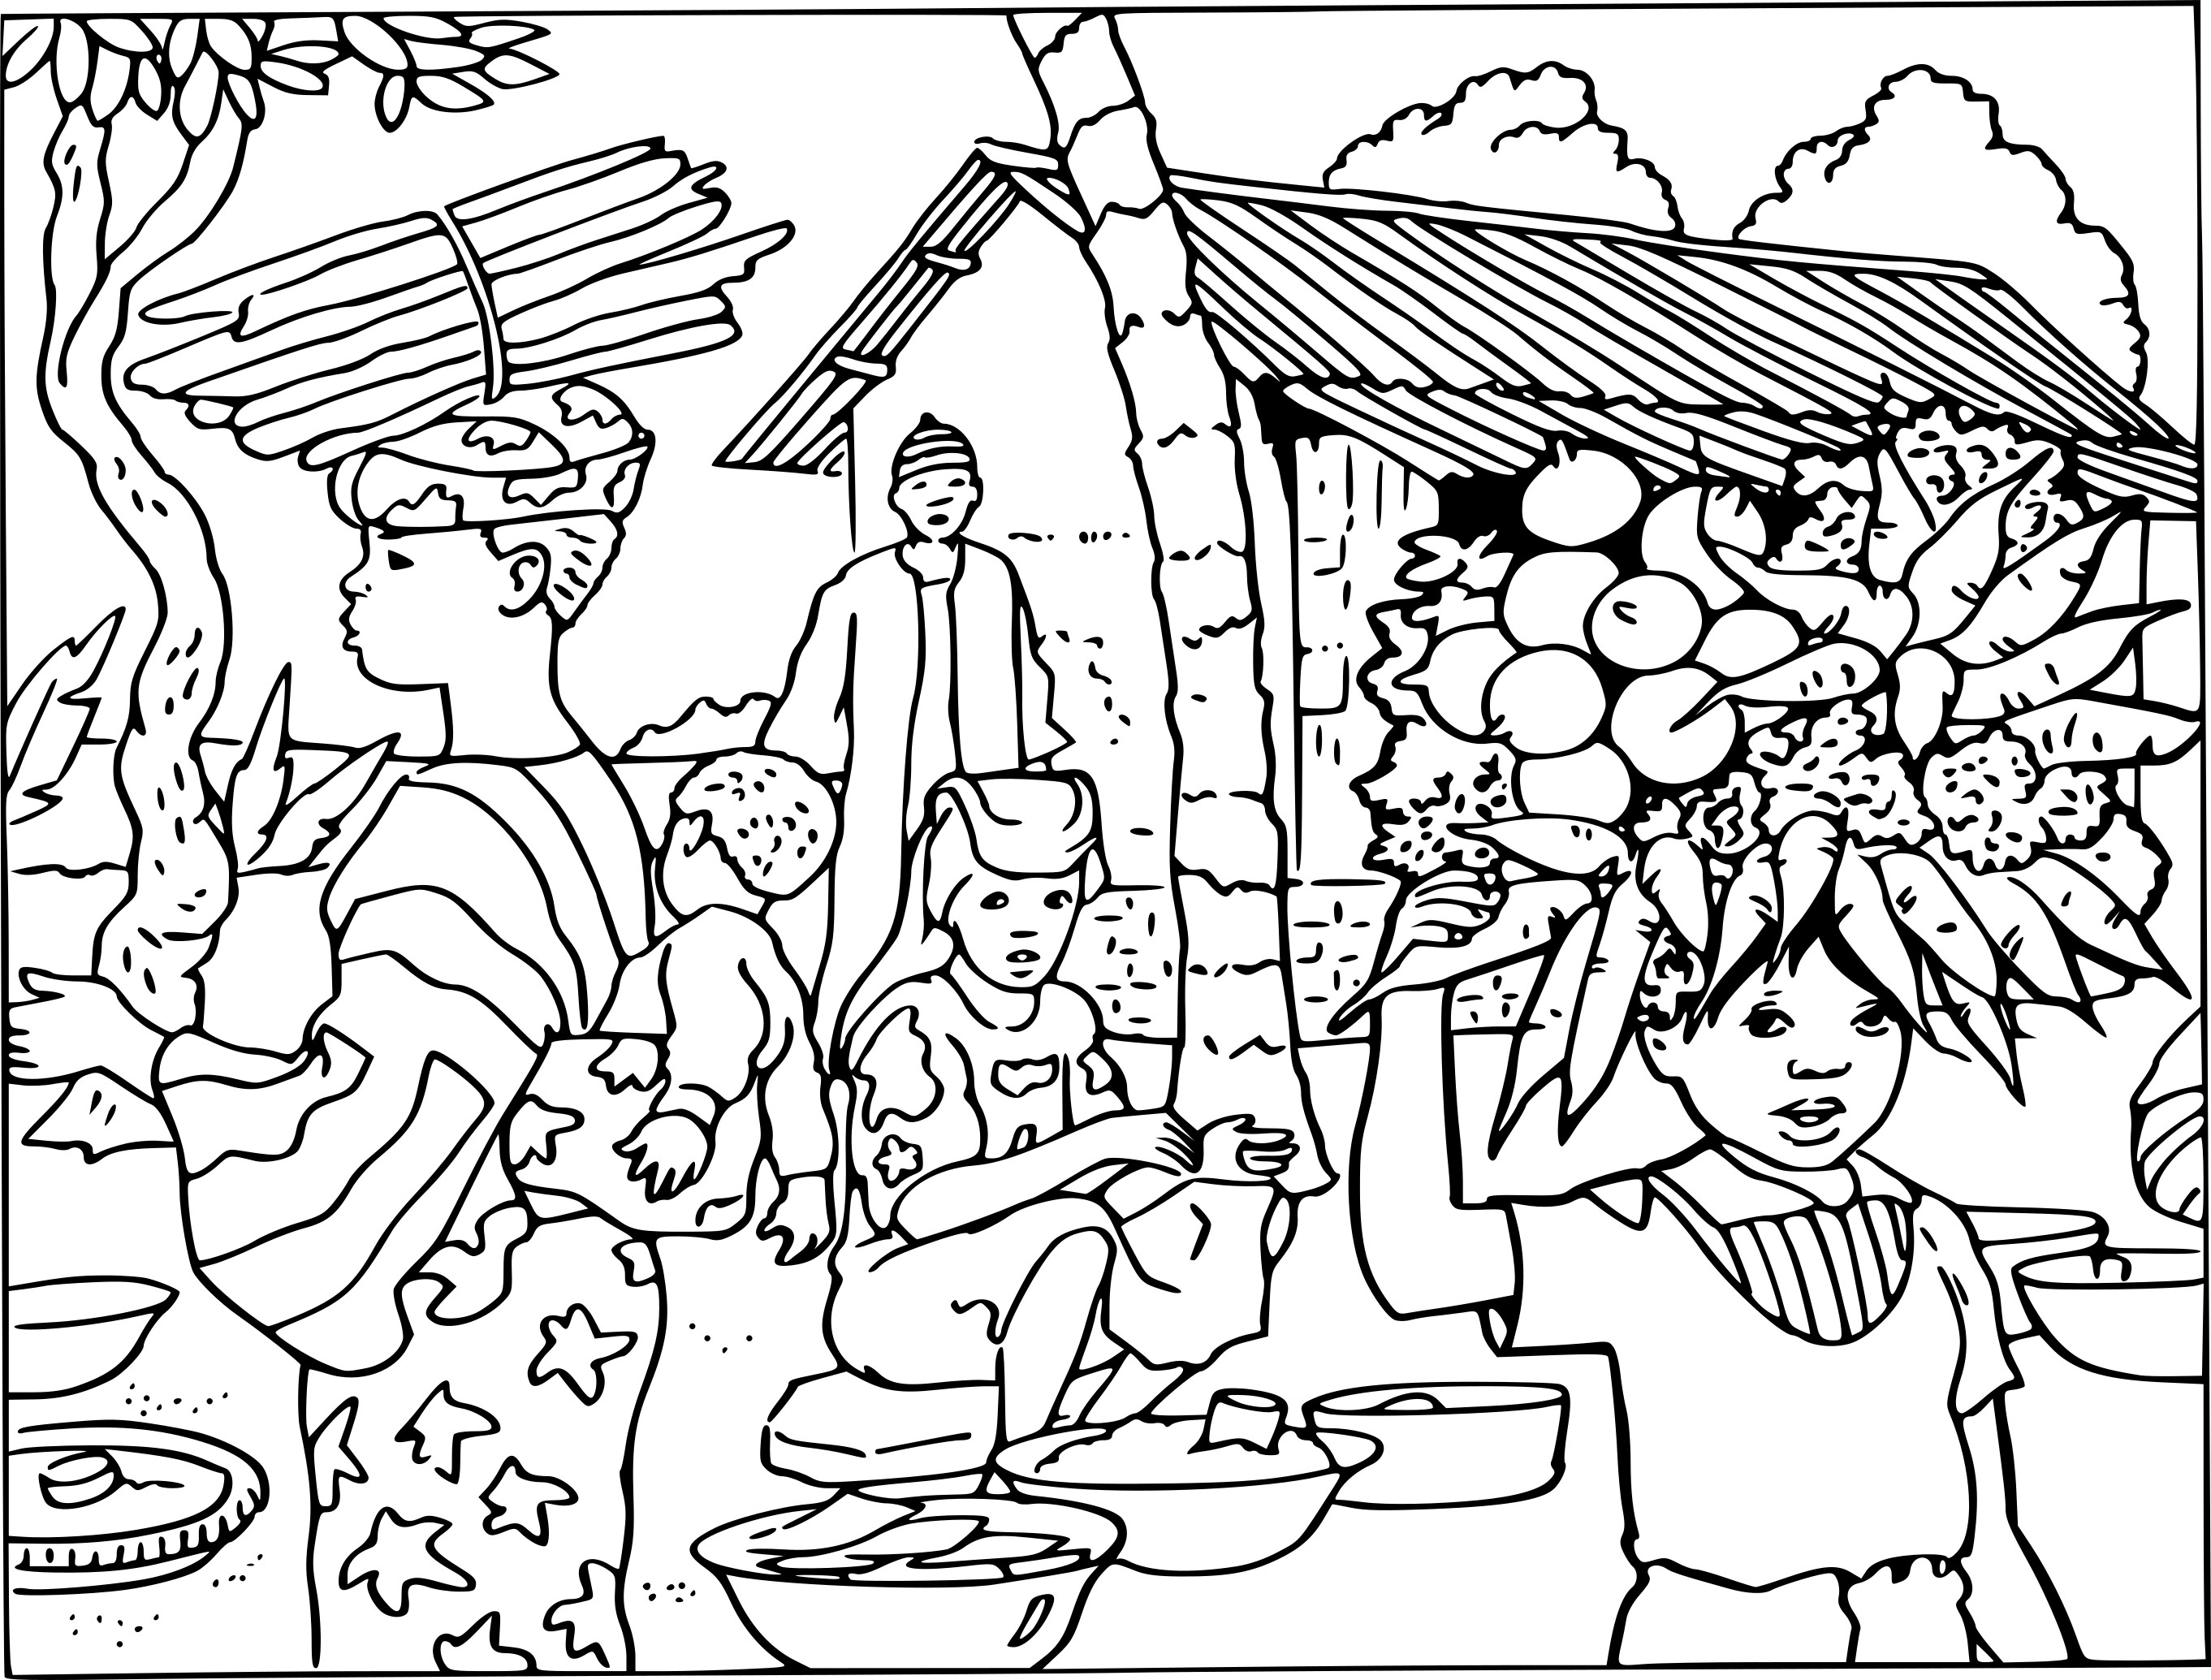 Africa Village coloring page